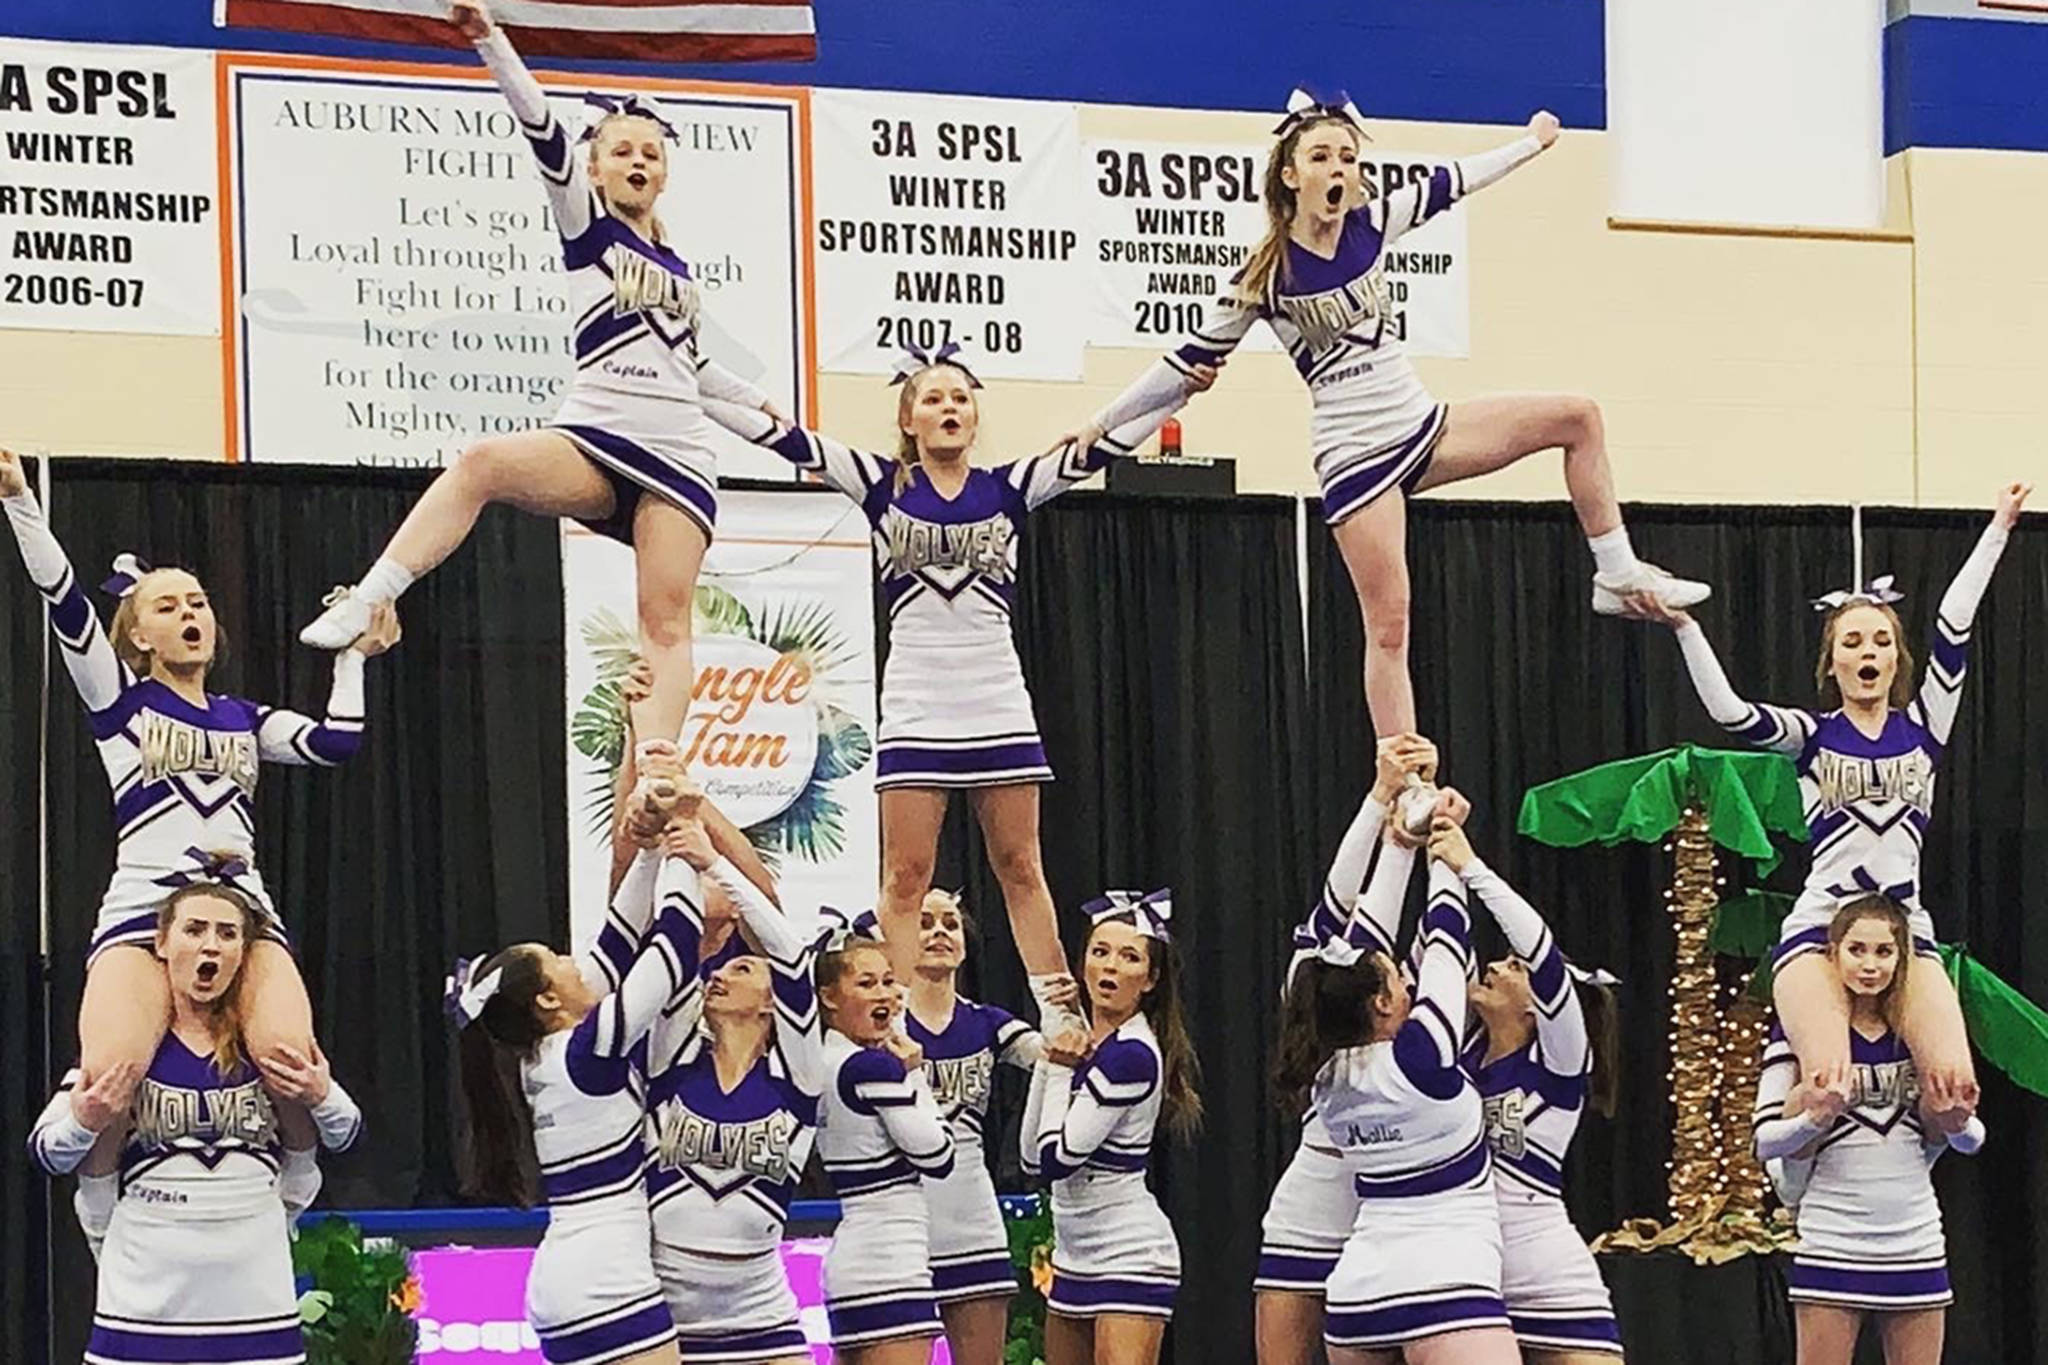 Sequim High School competition cheerleaders perform during the Jungle Jam competition hosted at Auburn Mountainview High School. The SHS cheer squad won the Medium Non-tumbling division with a score of 59.5 points, which qualifies them to compete at state in February for the first time in school history. Submitted photo